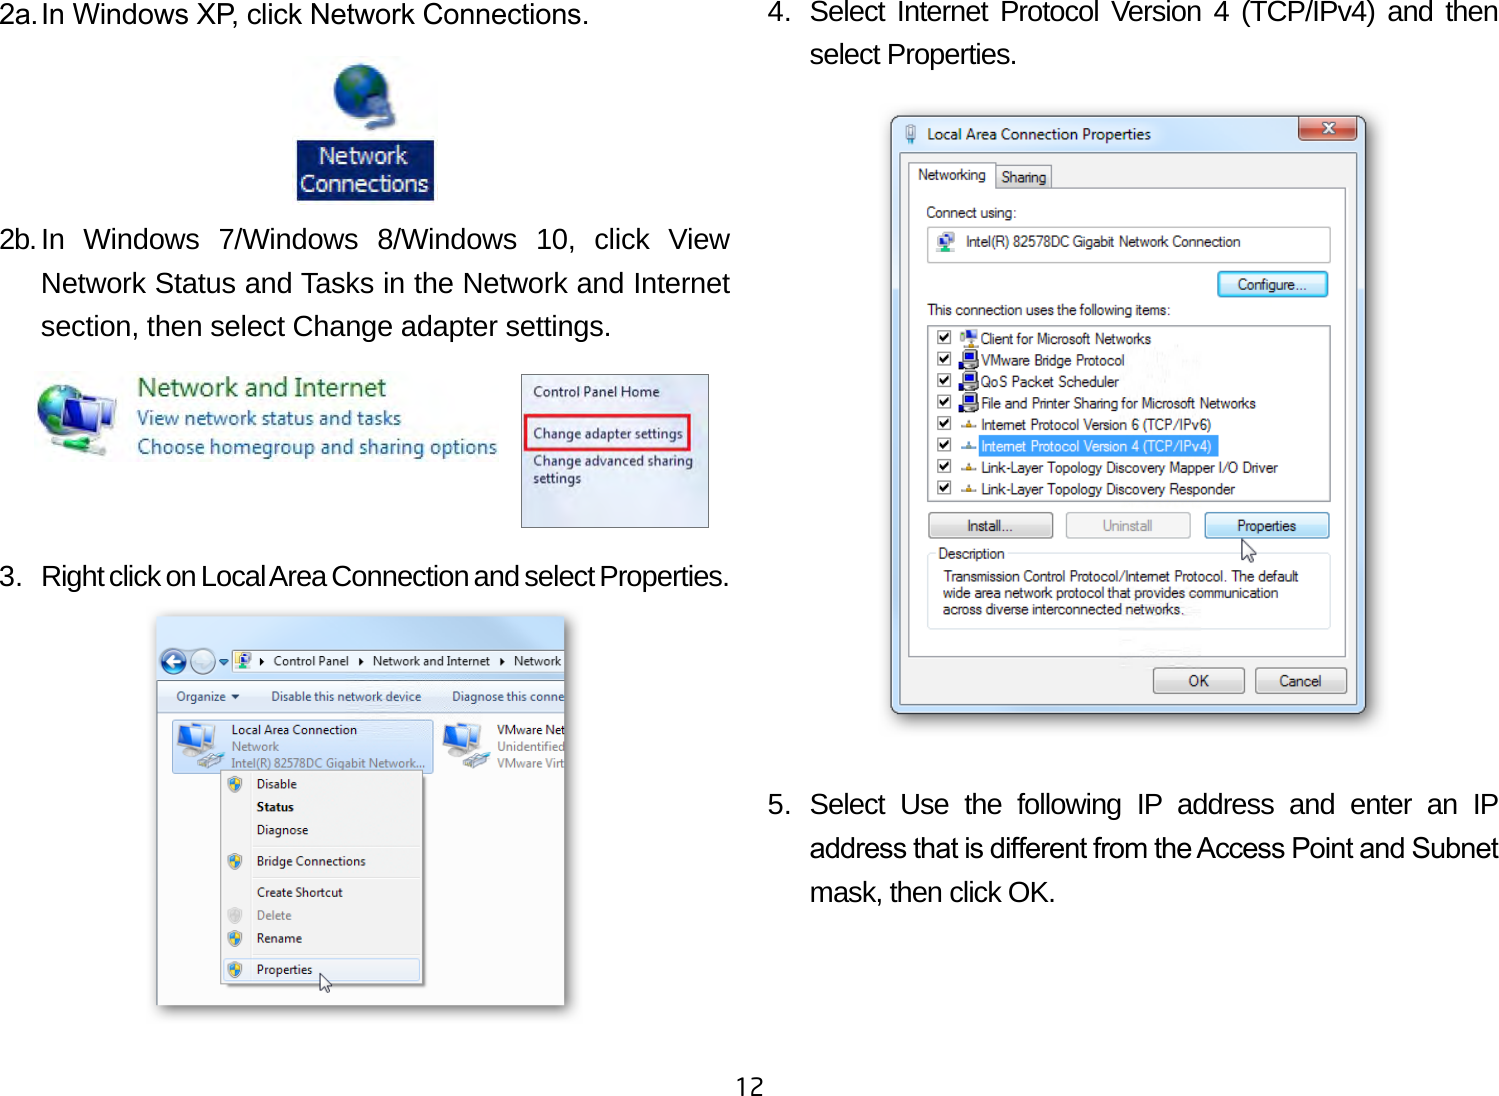 122a. In Windows XP, click Network Connections. 2b. In Windows 7/Windows 8/Windows 10, click View Network Status and Tasks in the Network and Internet section, then select Change adapter settings.3.  Right click on Local Area Connection and select Properties.4.  Select Internet Protocol Version 4 (TCP/IPv4) and then select Properties.5. Select Use the following IP address and enter an IP address that is dierent from the Access Point and Subnet mask, then click OK.